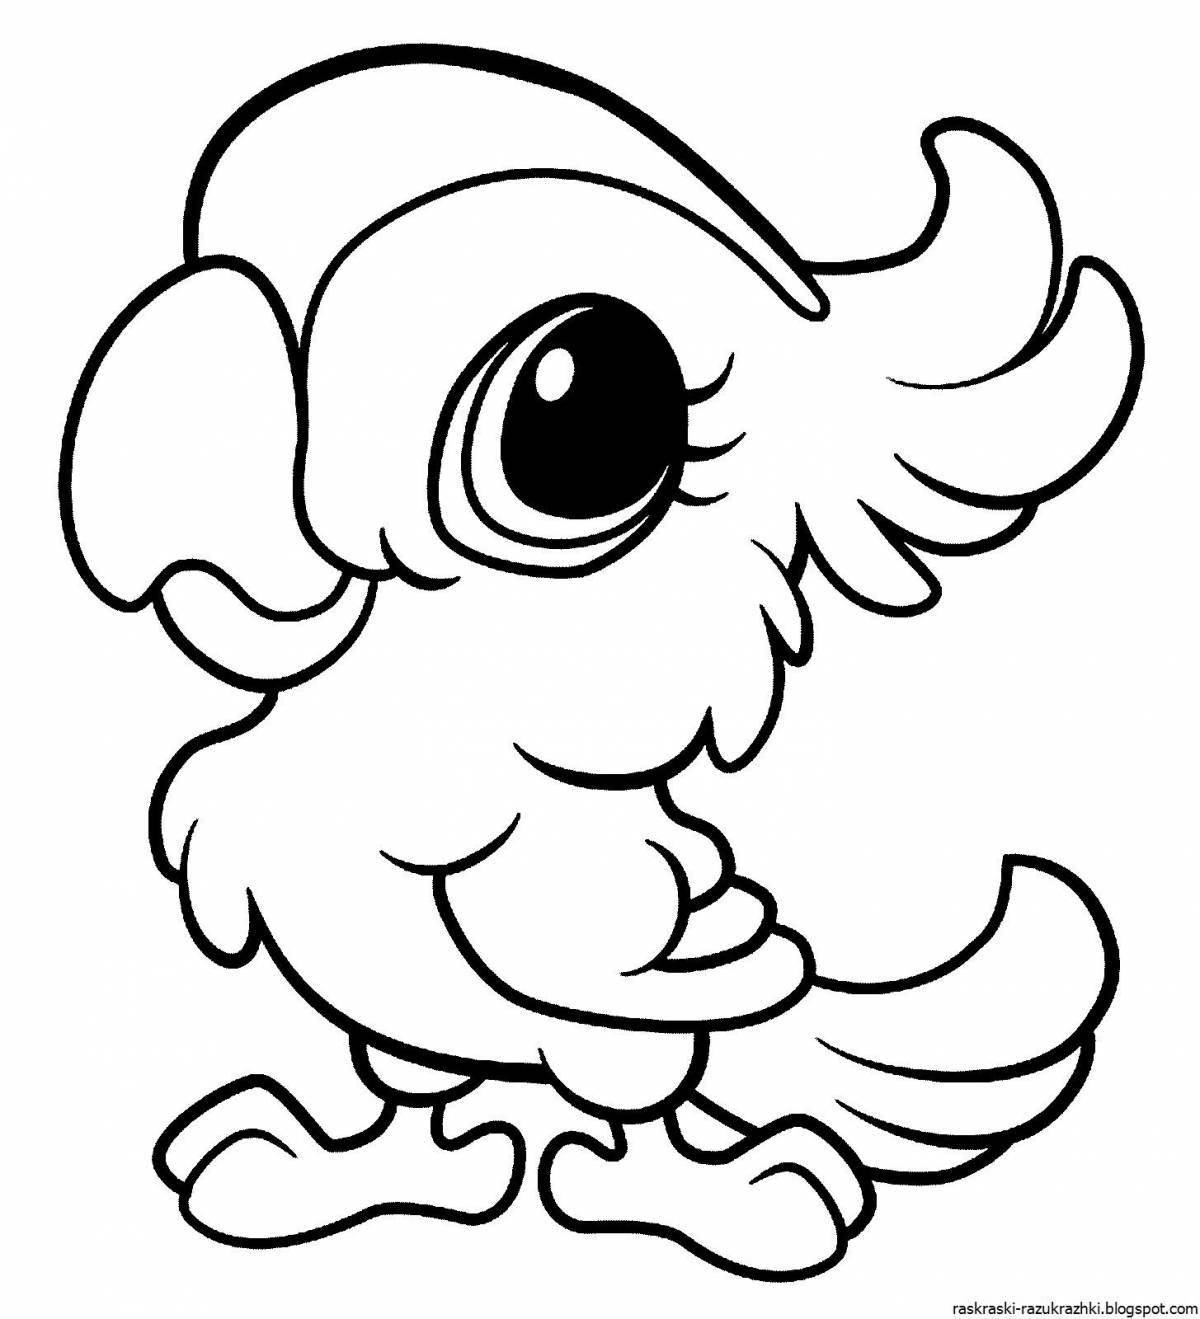 Amazing little animal coloring pages